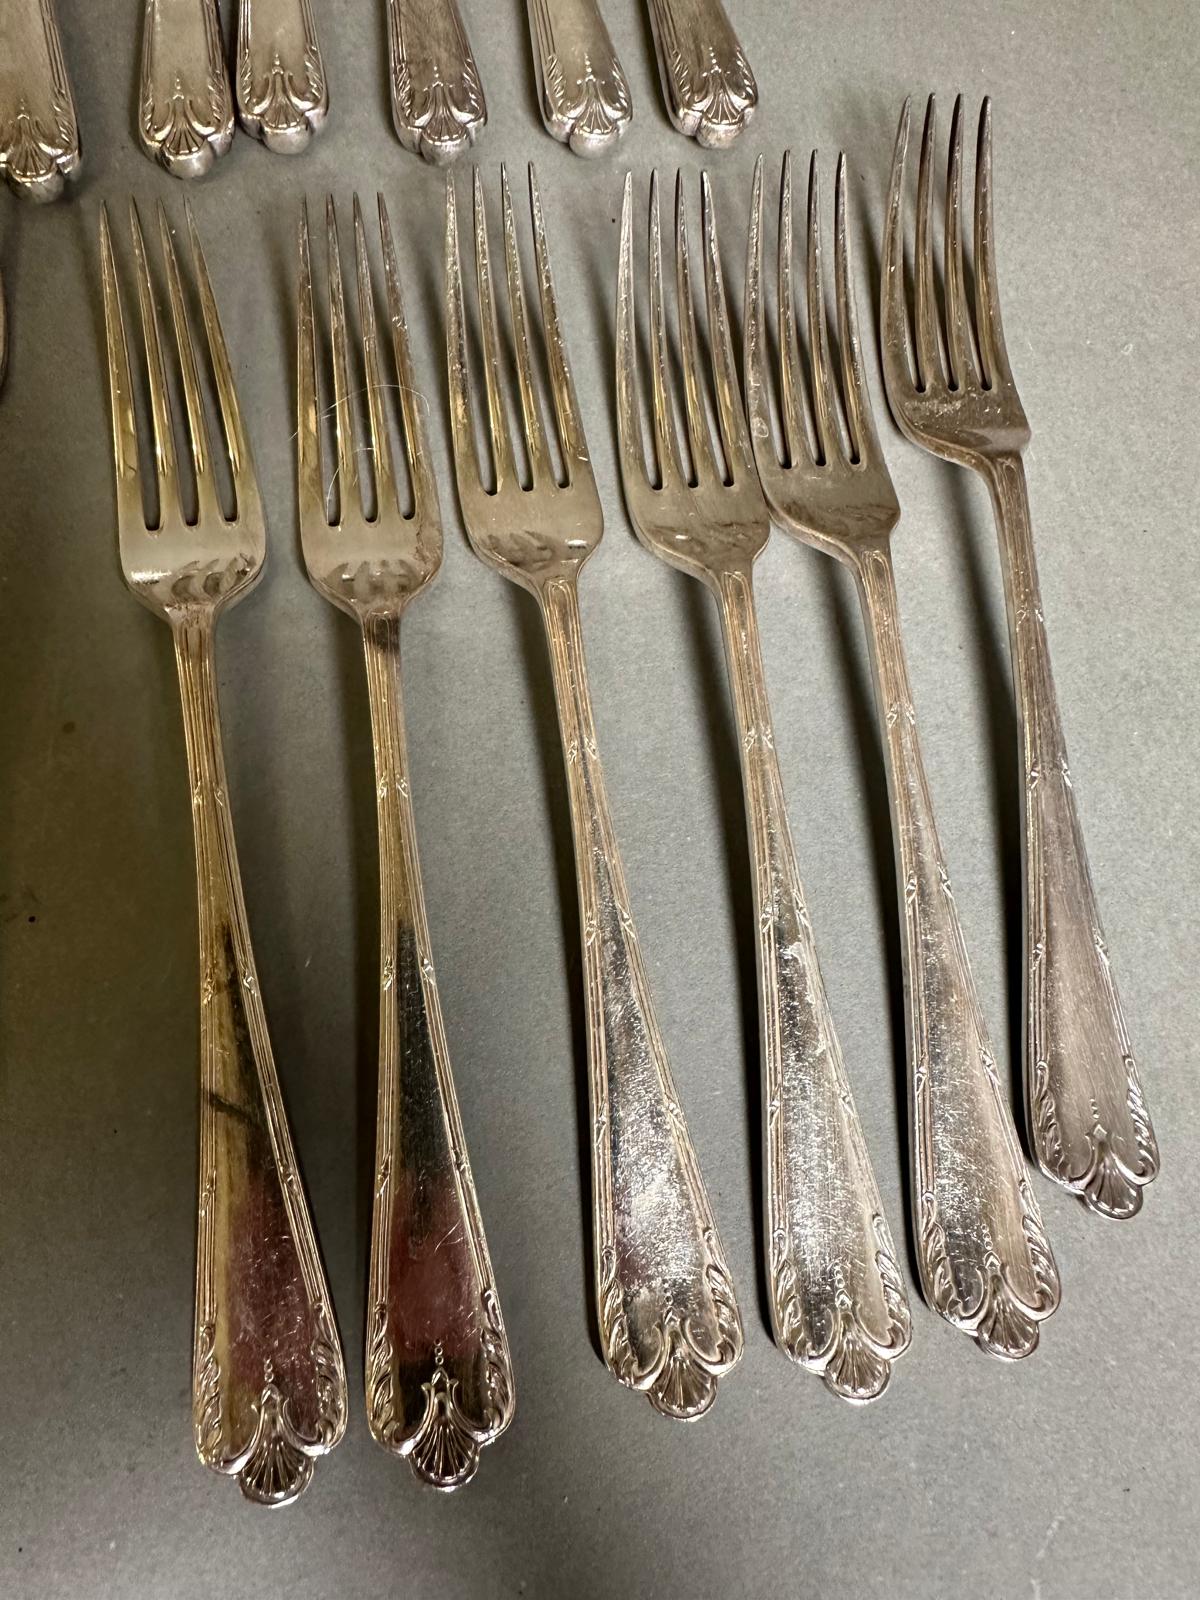 A Garard & Co six place setting silverplated cutlery service in original box. - Image 4 of 7